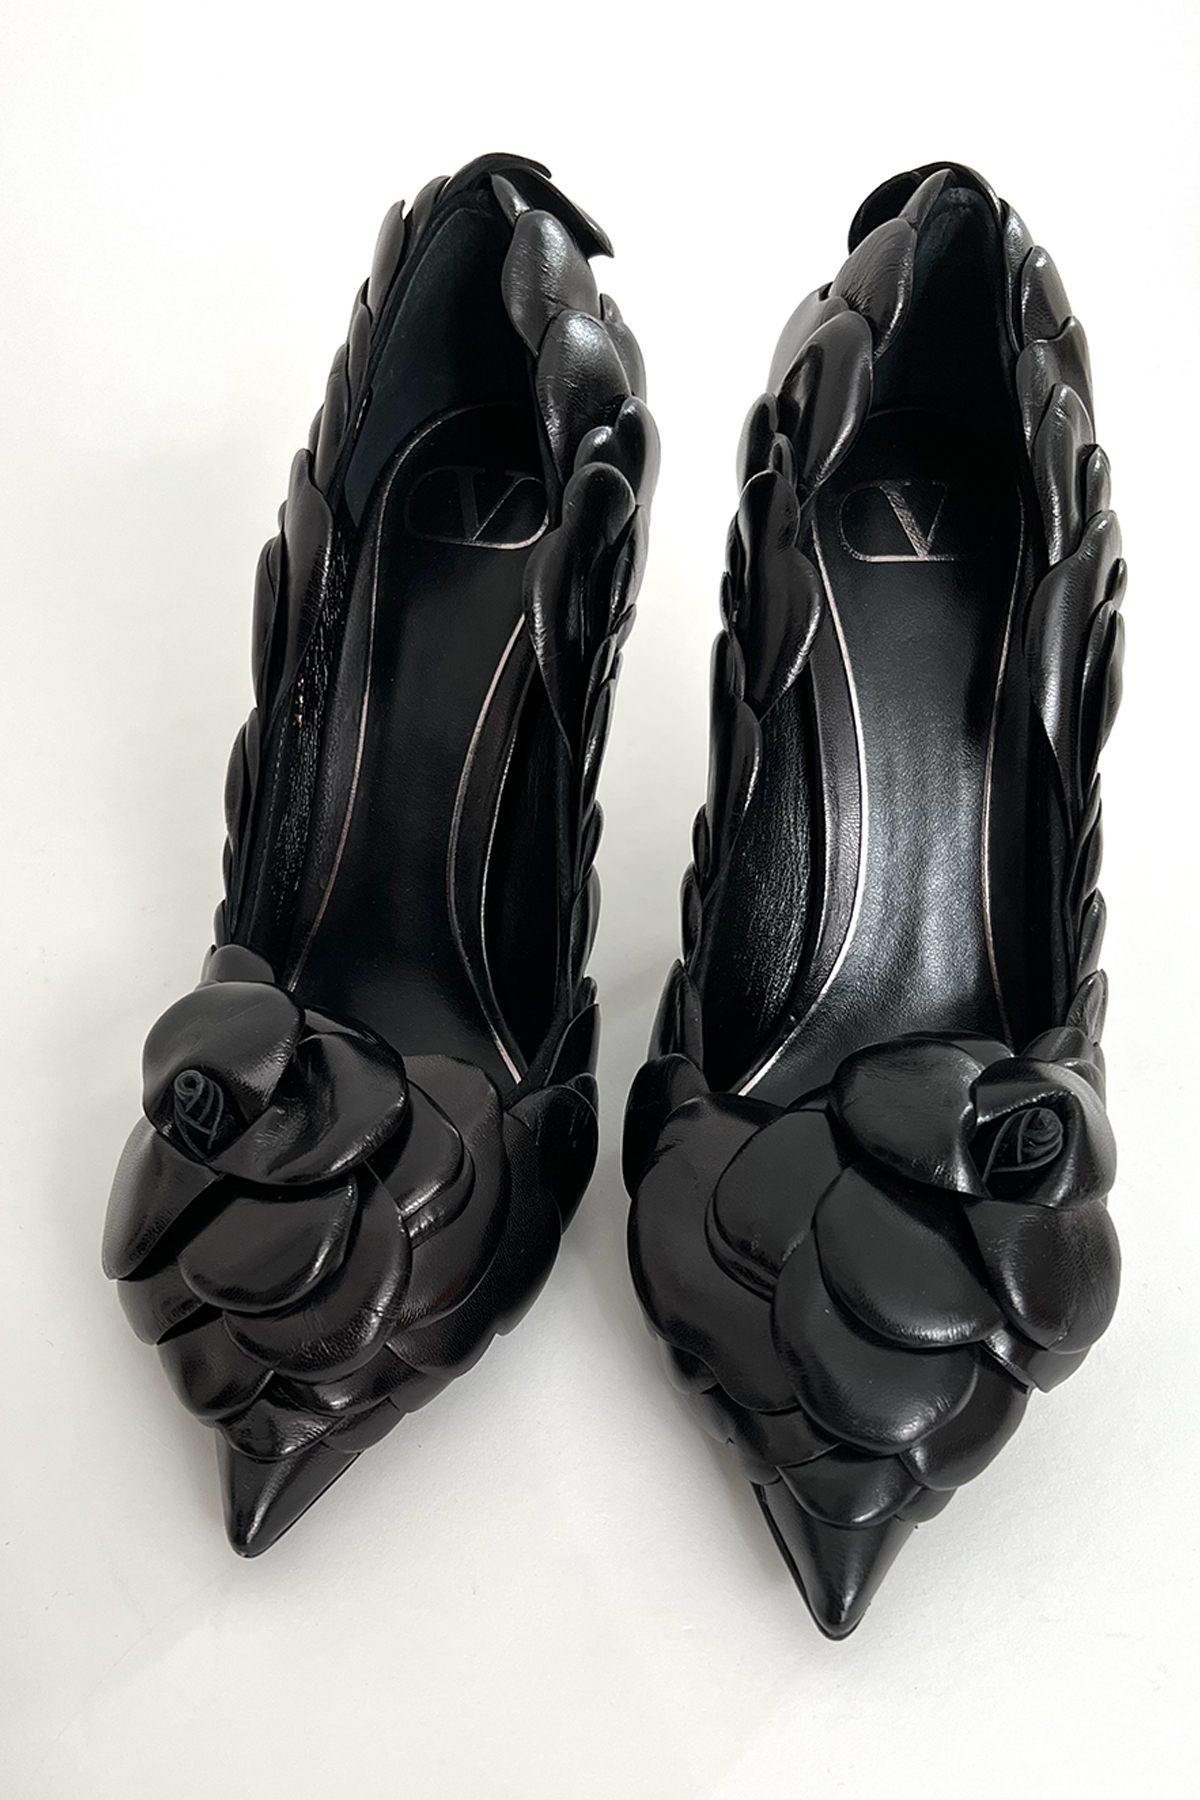 Valentino Heels Black With Roses - Size 38